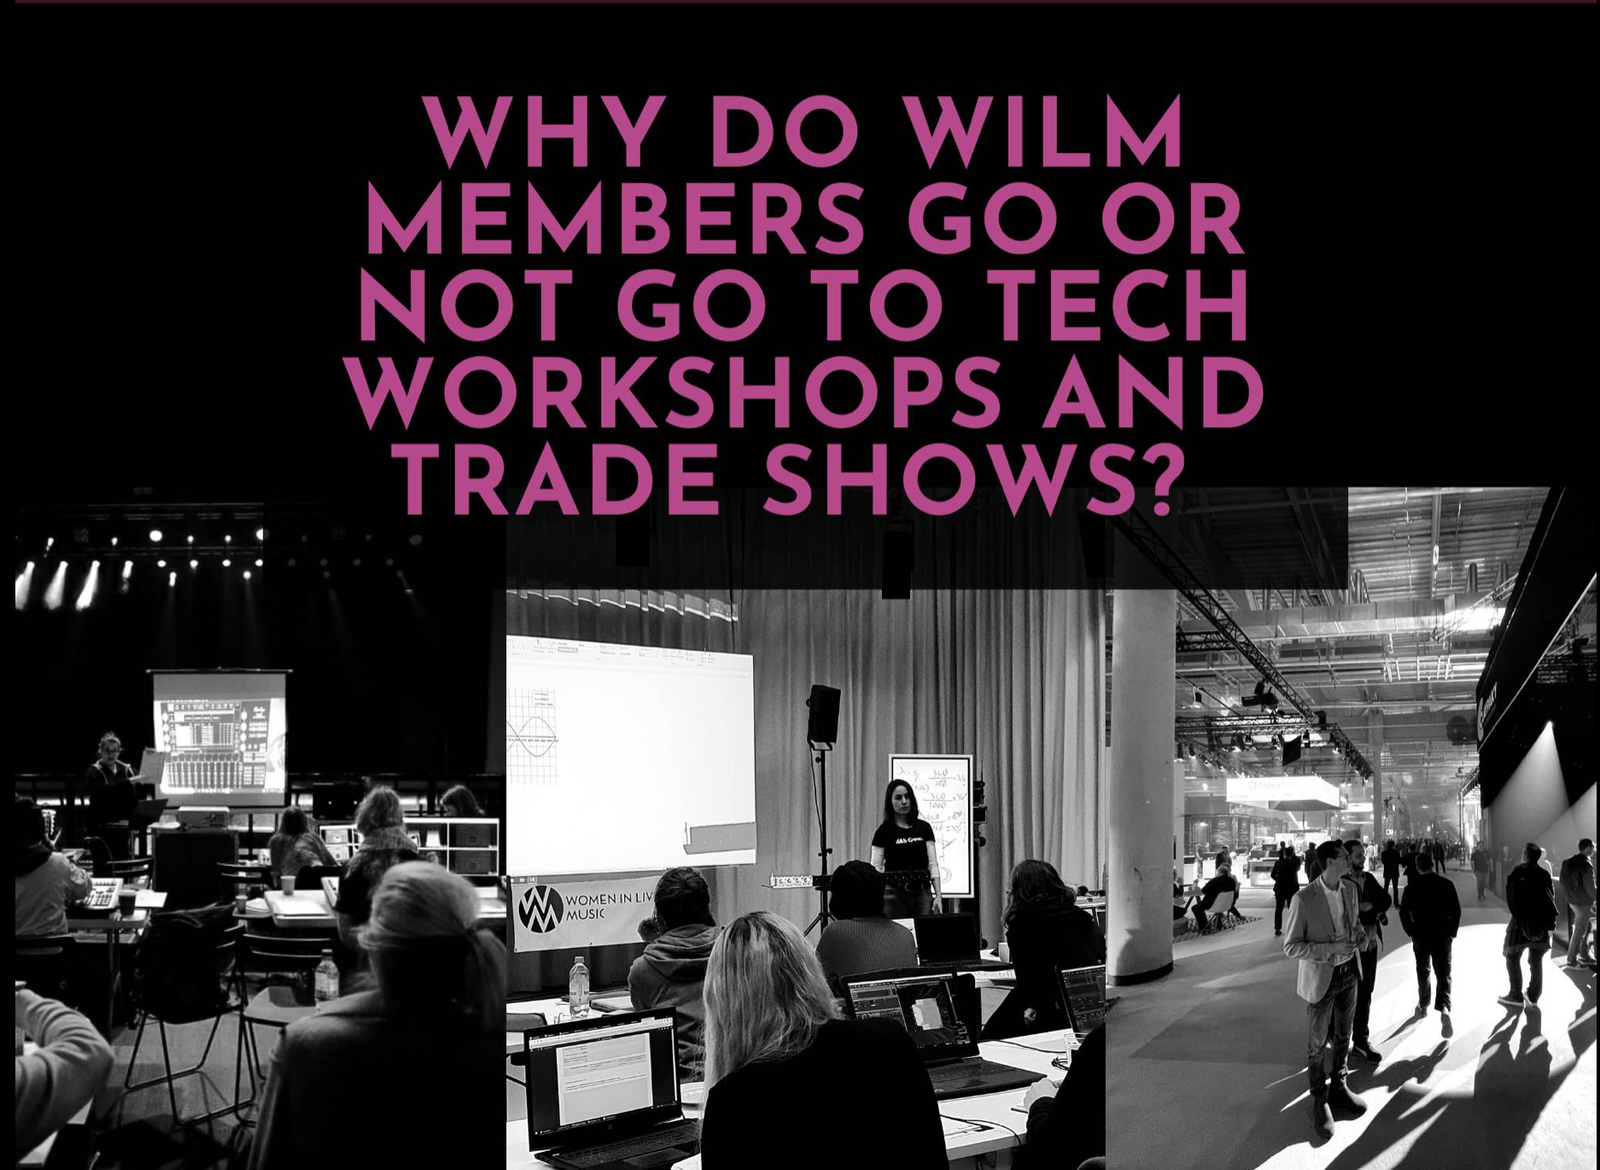 WILM Survey "Why do women go or not go to tech trade shows/workshops"